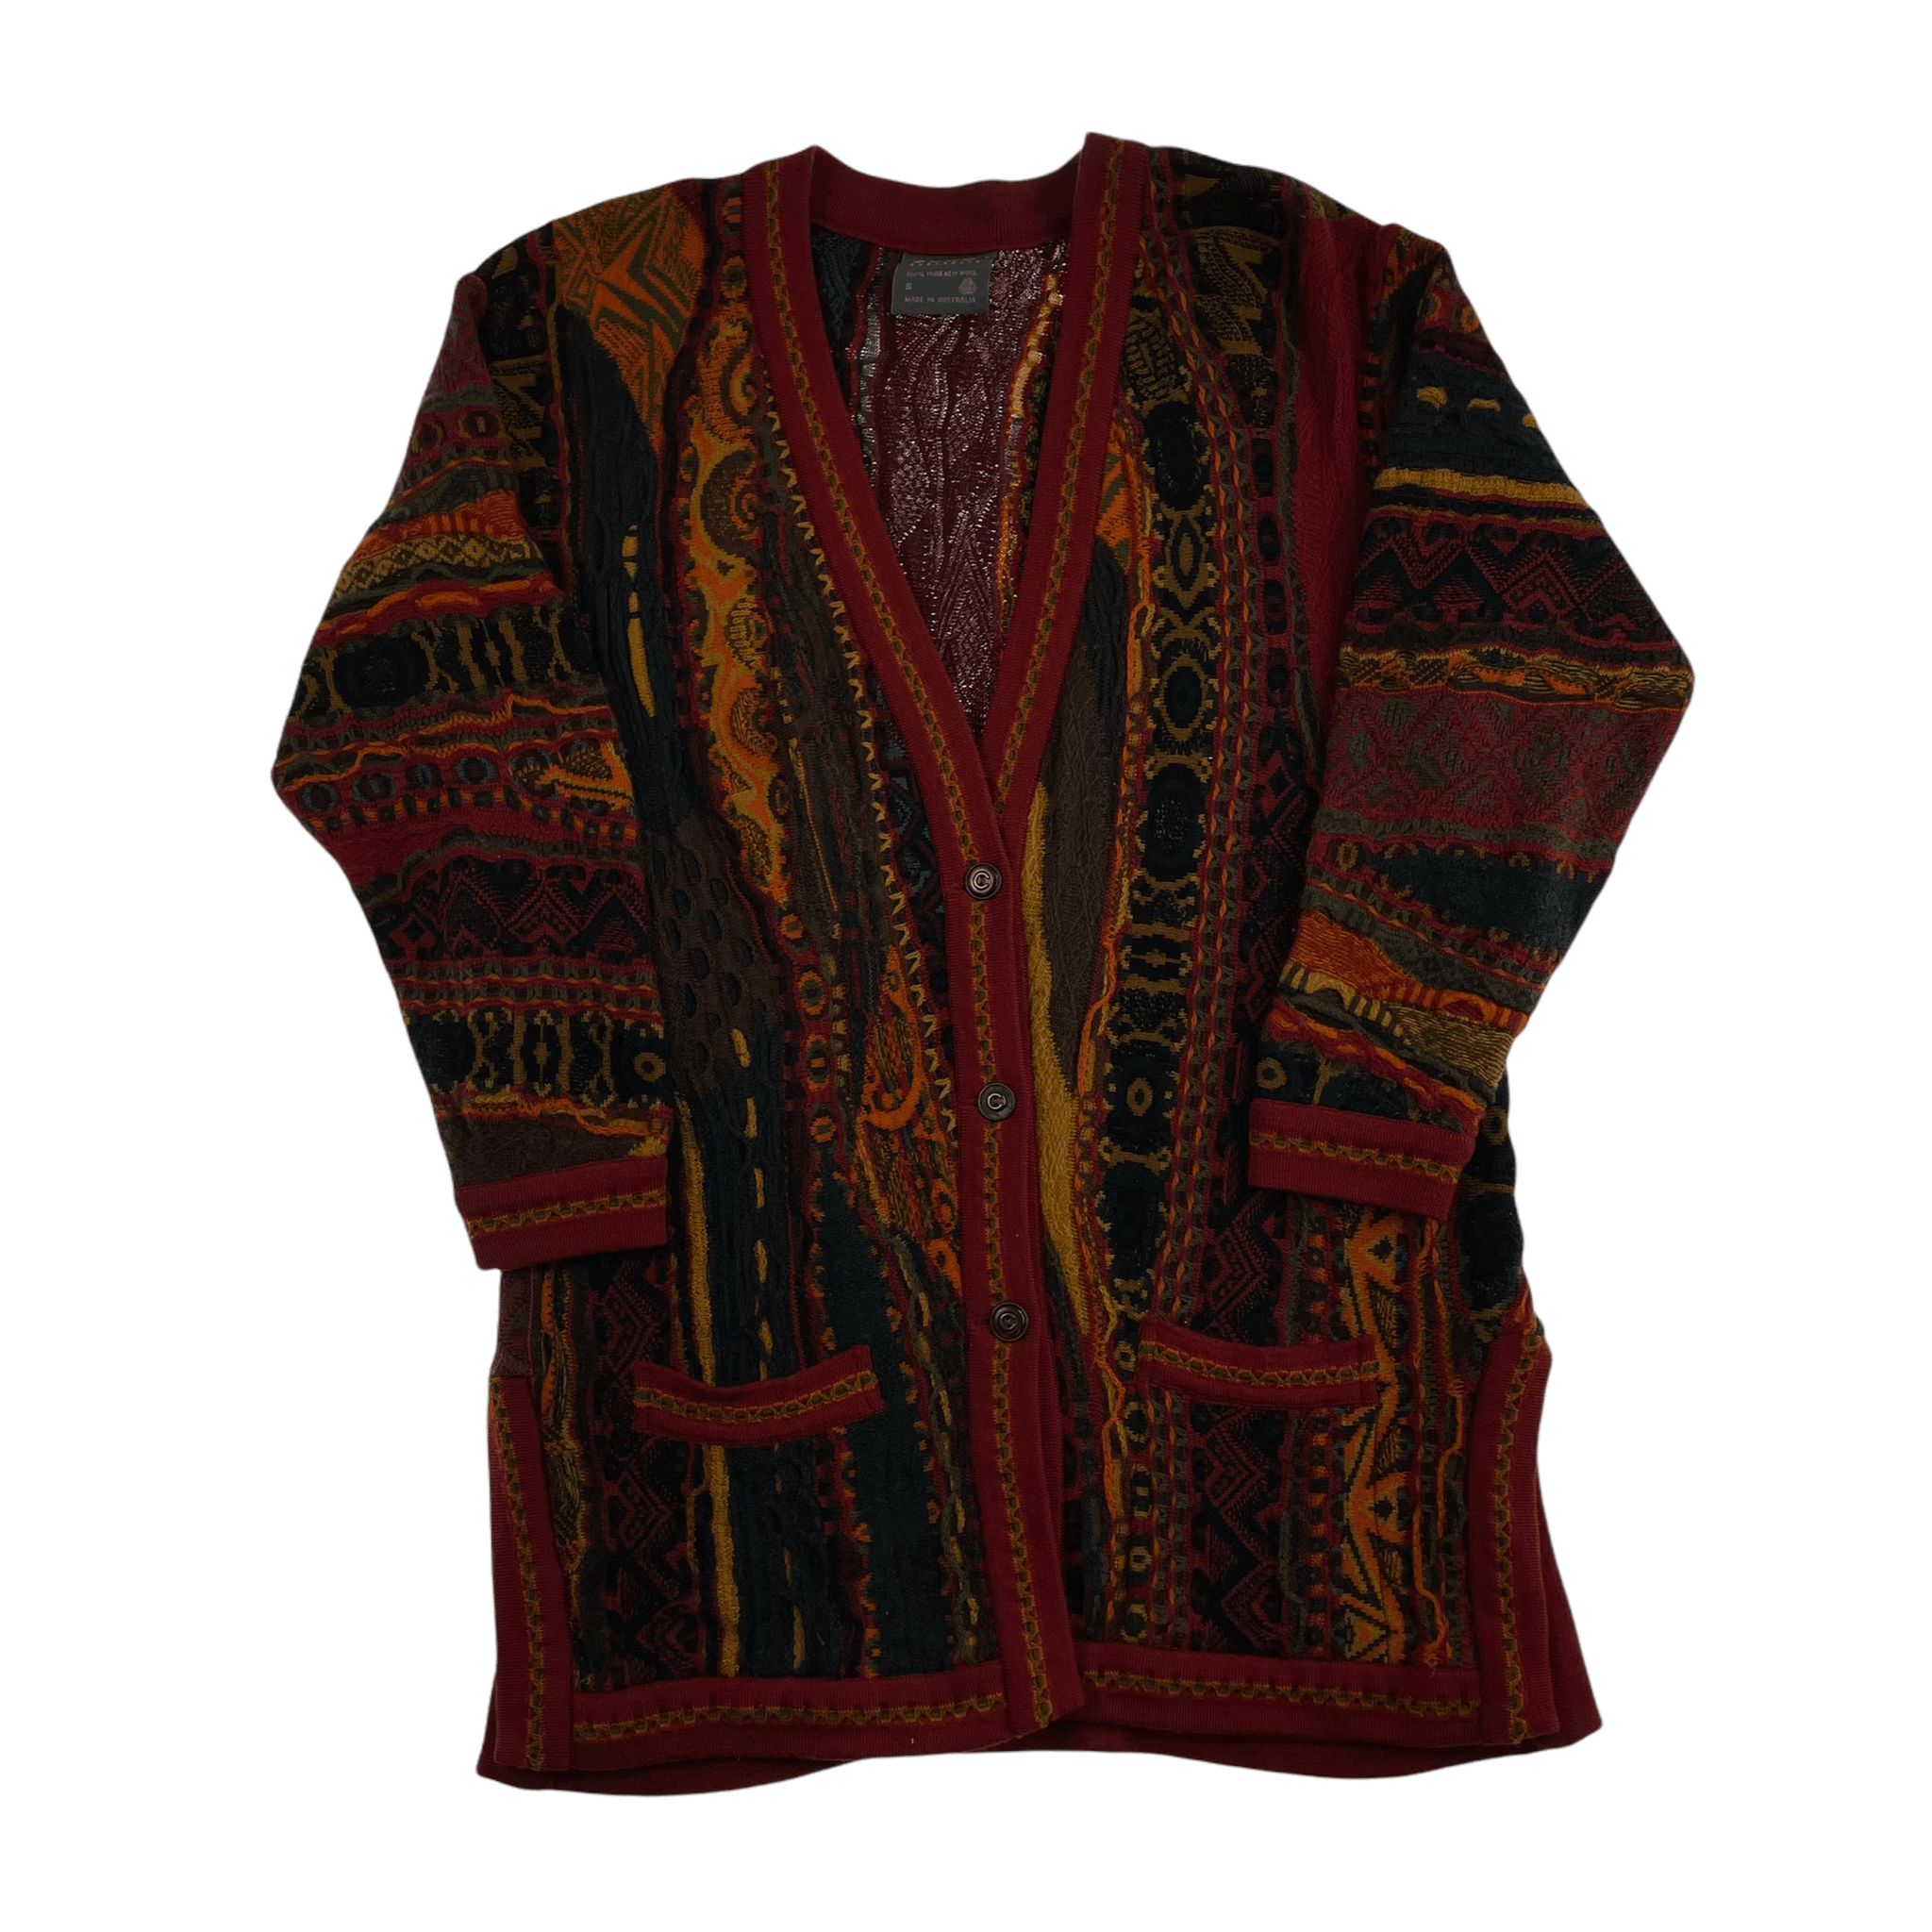 Vintage Coogi knitted cardigan women's size S - second wave